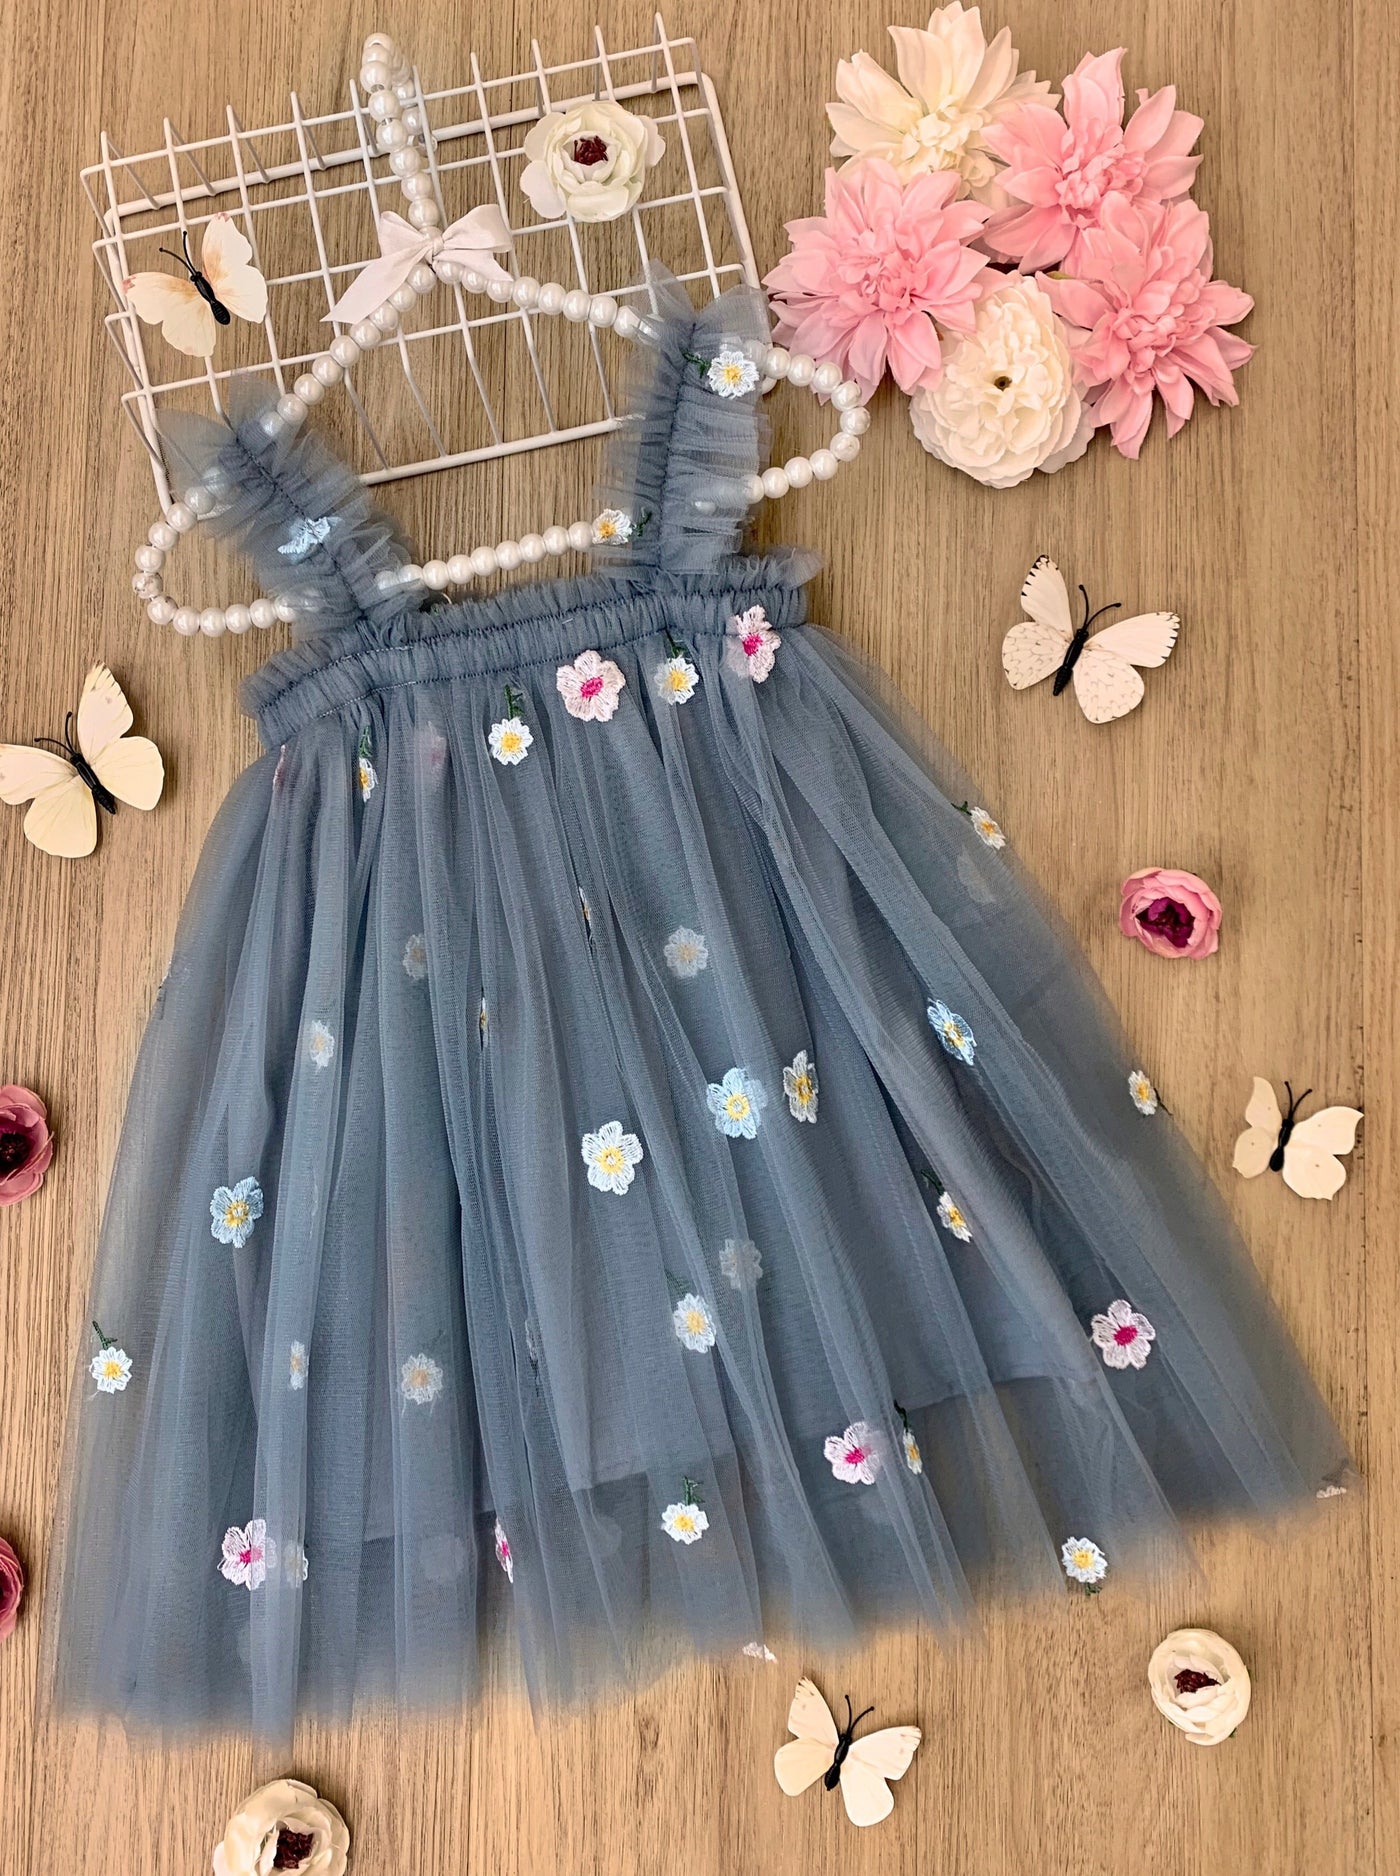 Girls grey dress features racerback sleeveless straps, multiple tulle layers with flower appliques 2T-10Y for toddlers and girls 